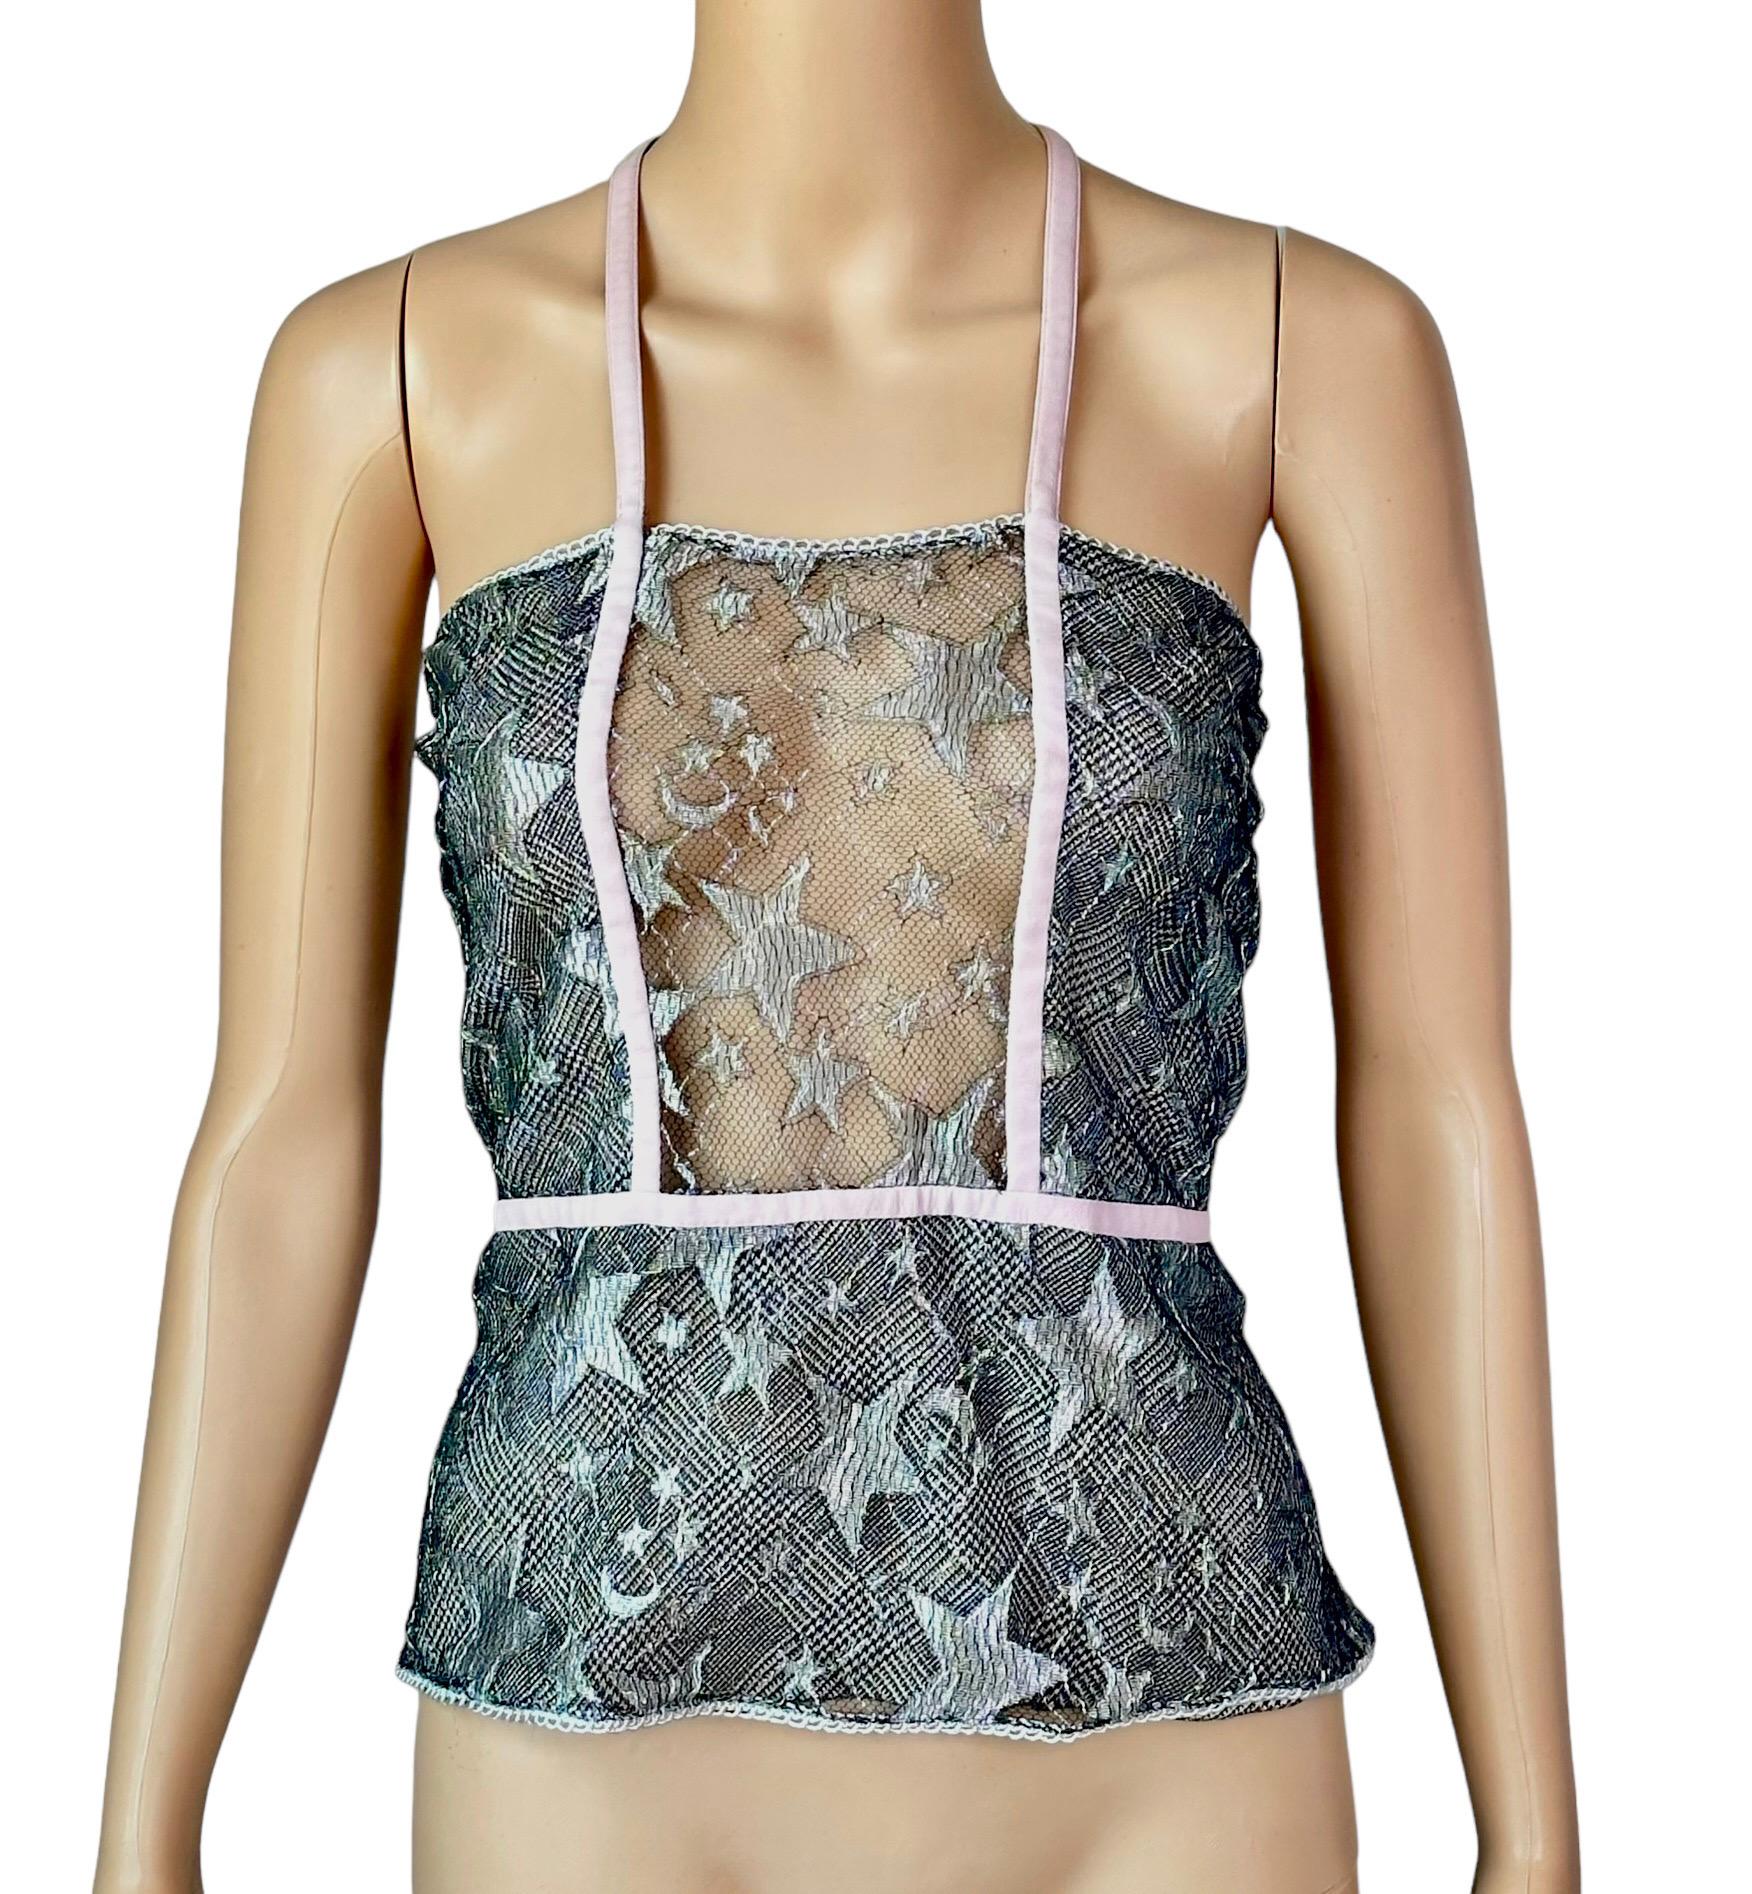 Gianni Versace S/S 1998 Runway Sheer Lace Star Wrap Top  In Good Condition For Sale In Naples, FL